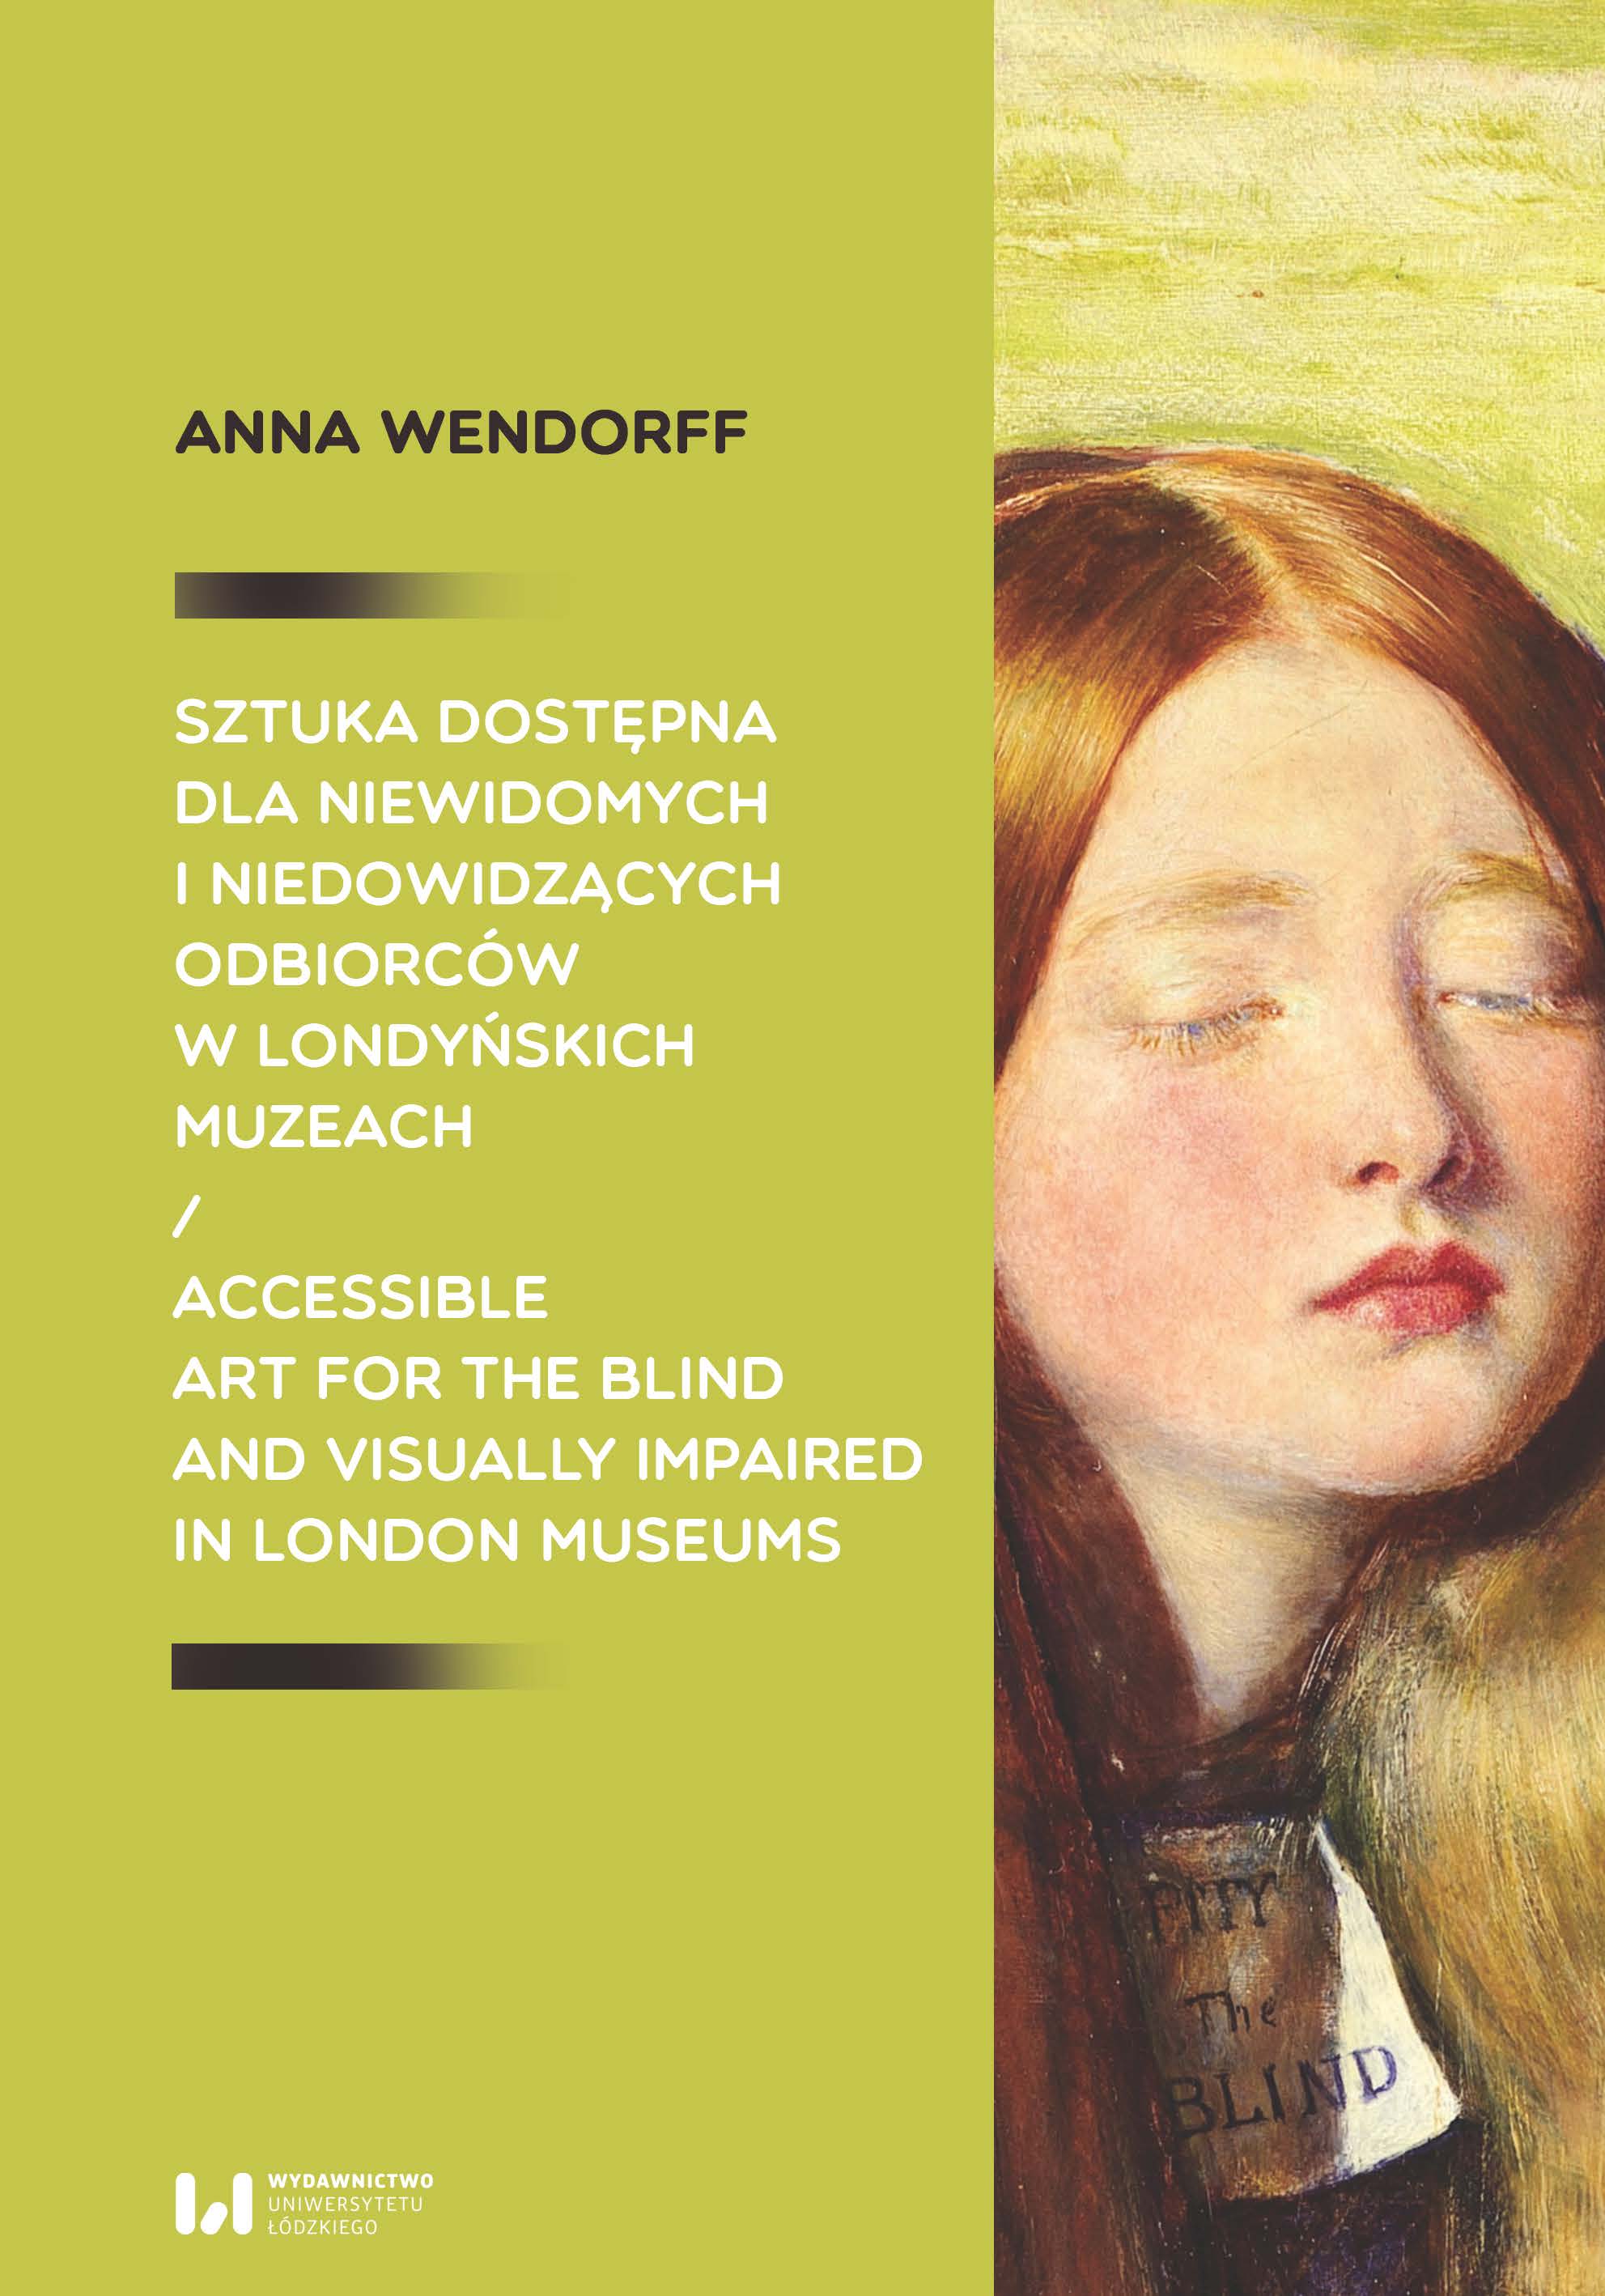 Accessible art for the blind and visually impaired in London museums